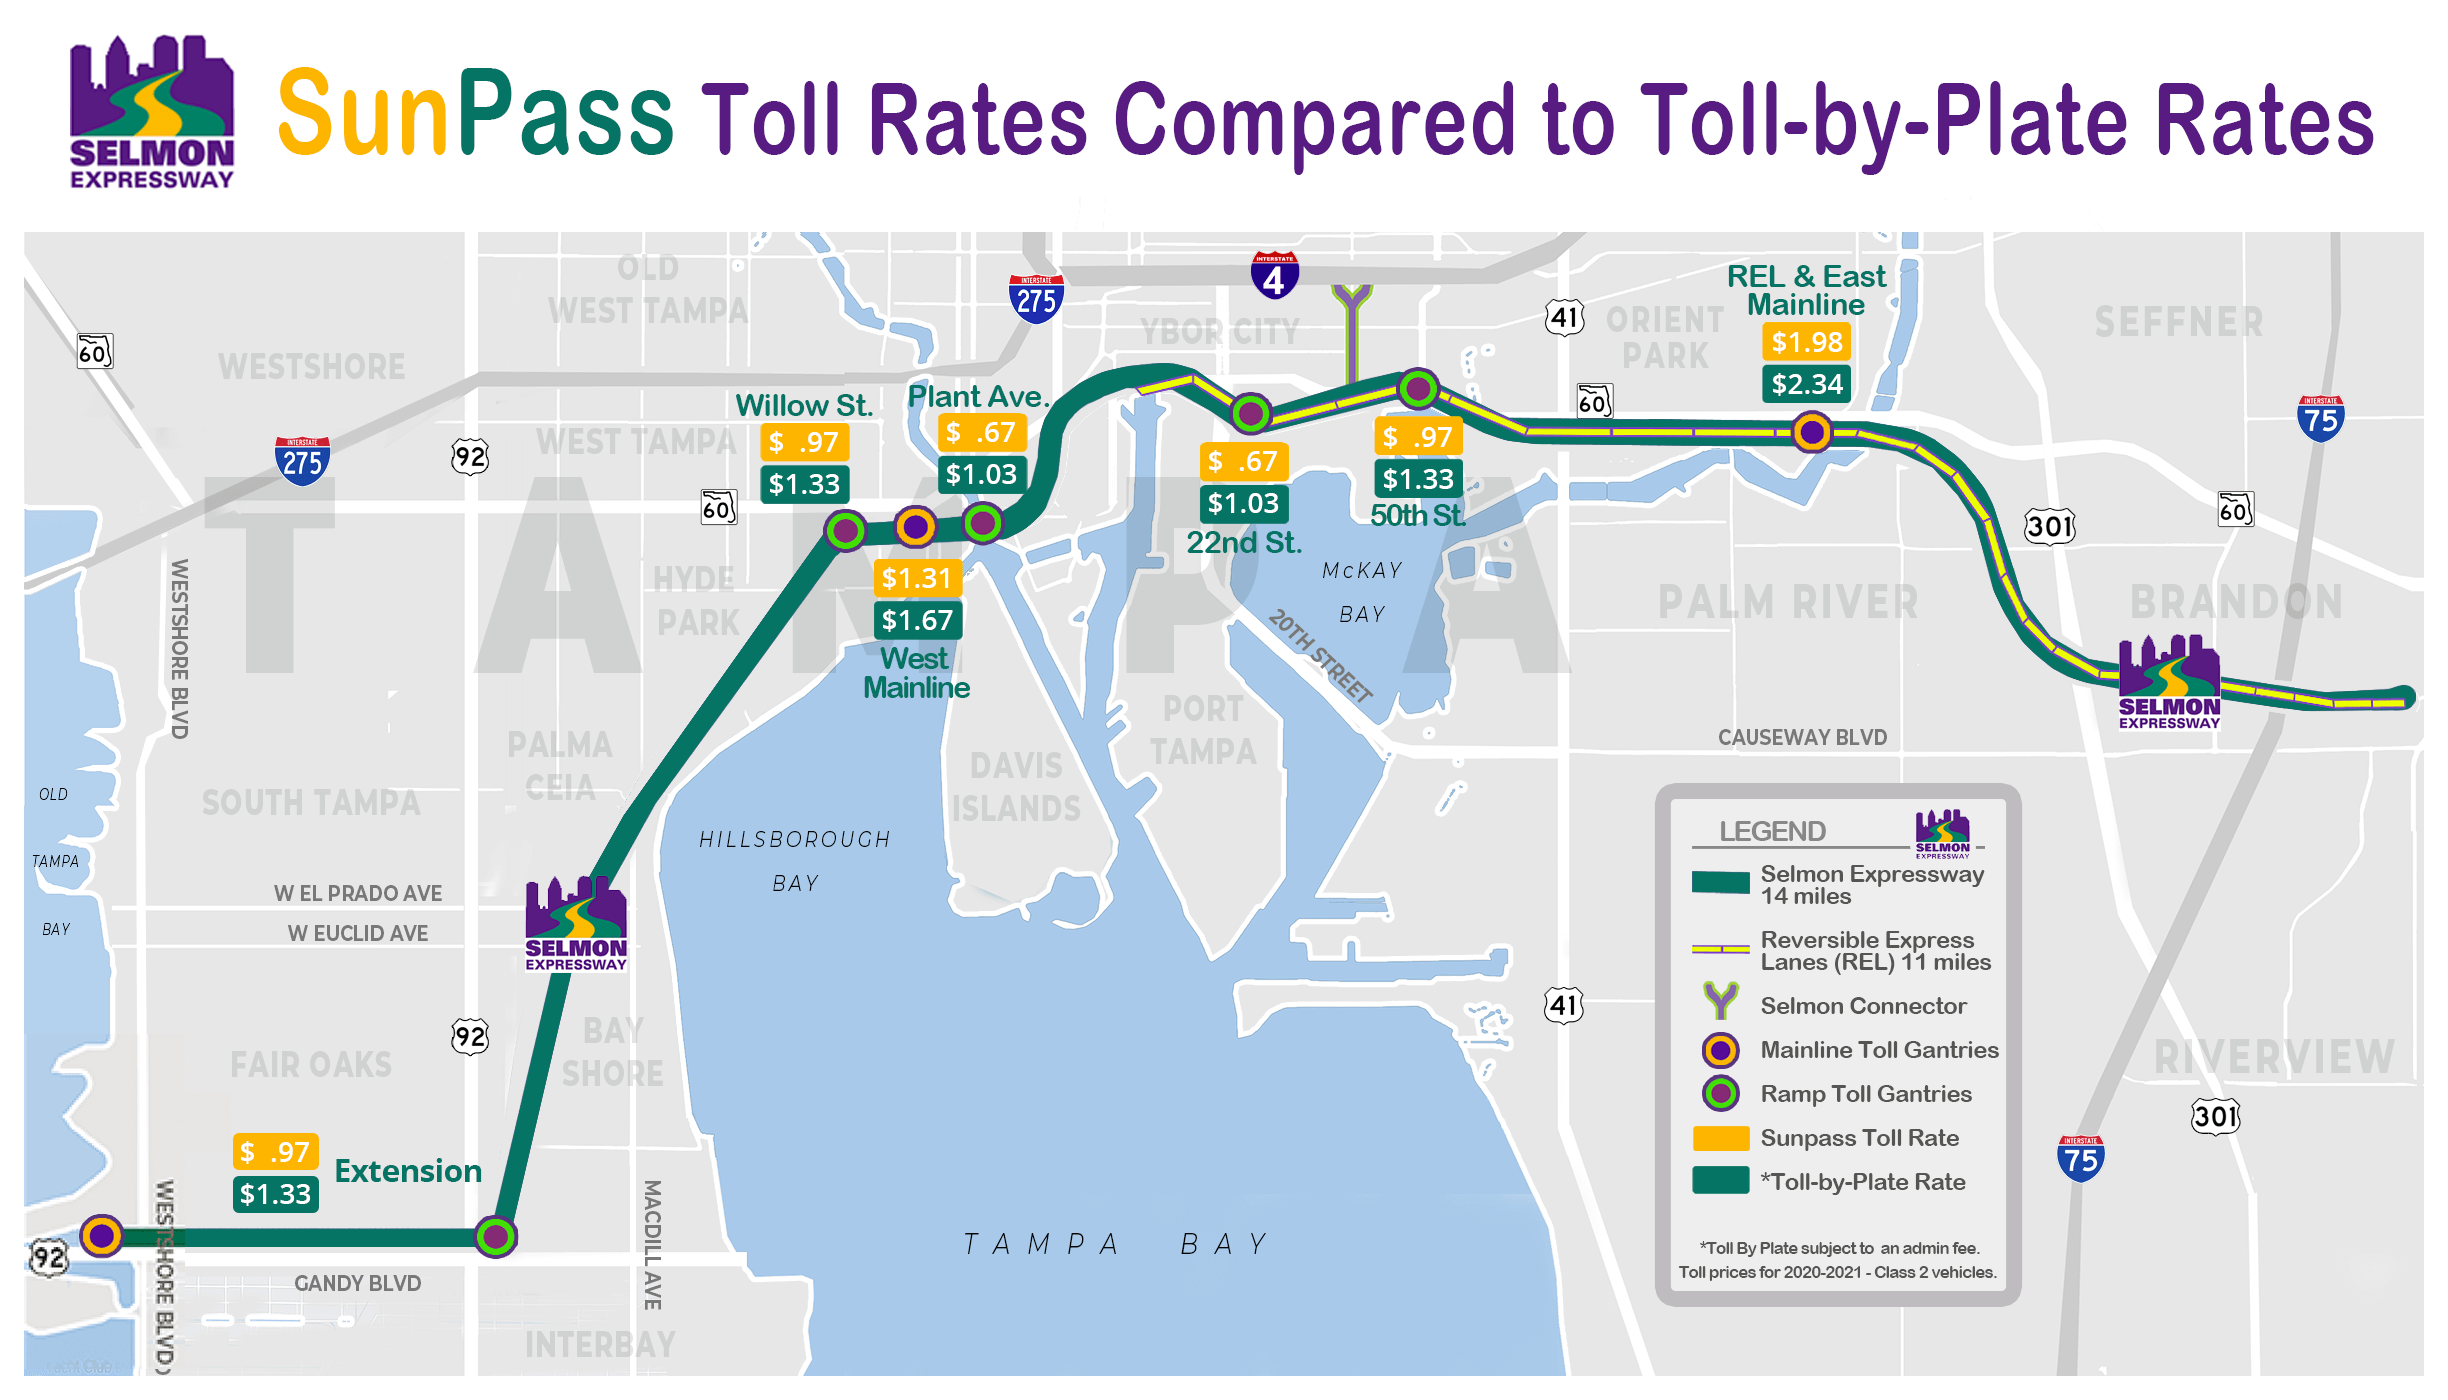 SunPass Toll Rates Compared to Toll-by-Plate Rates